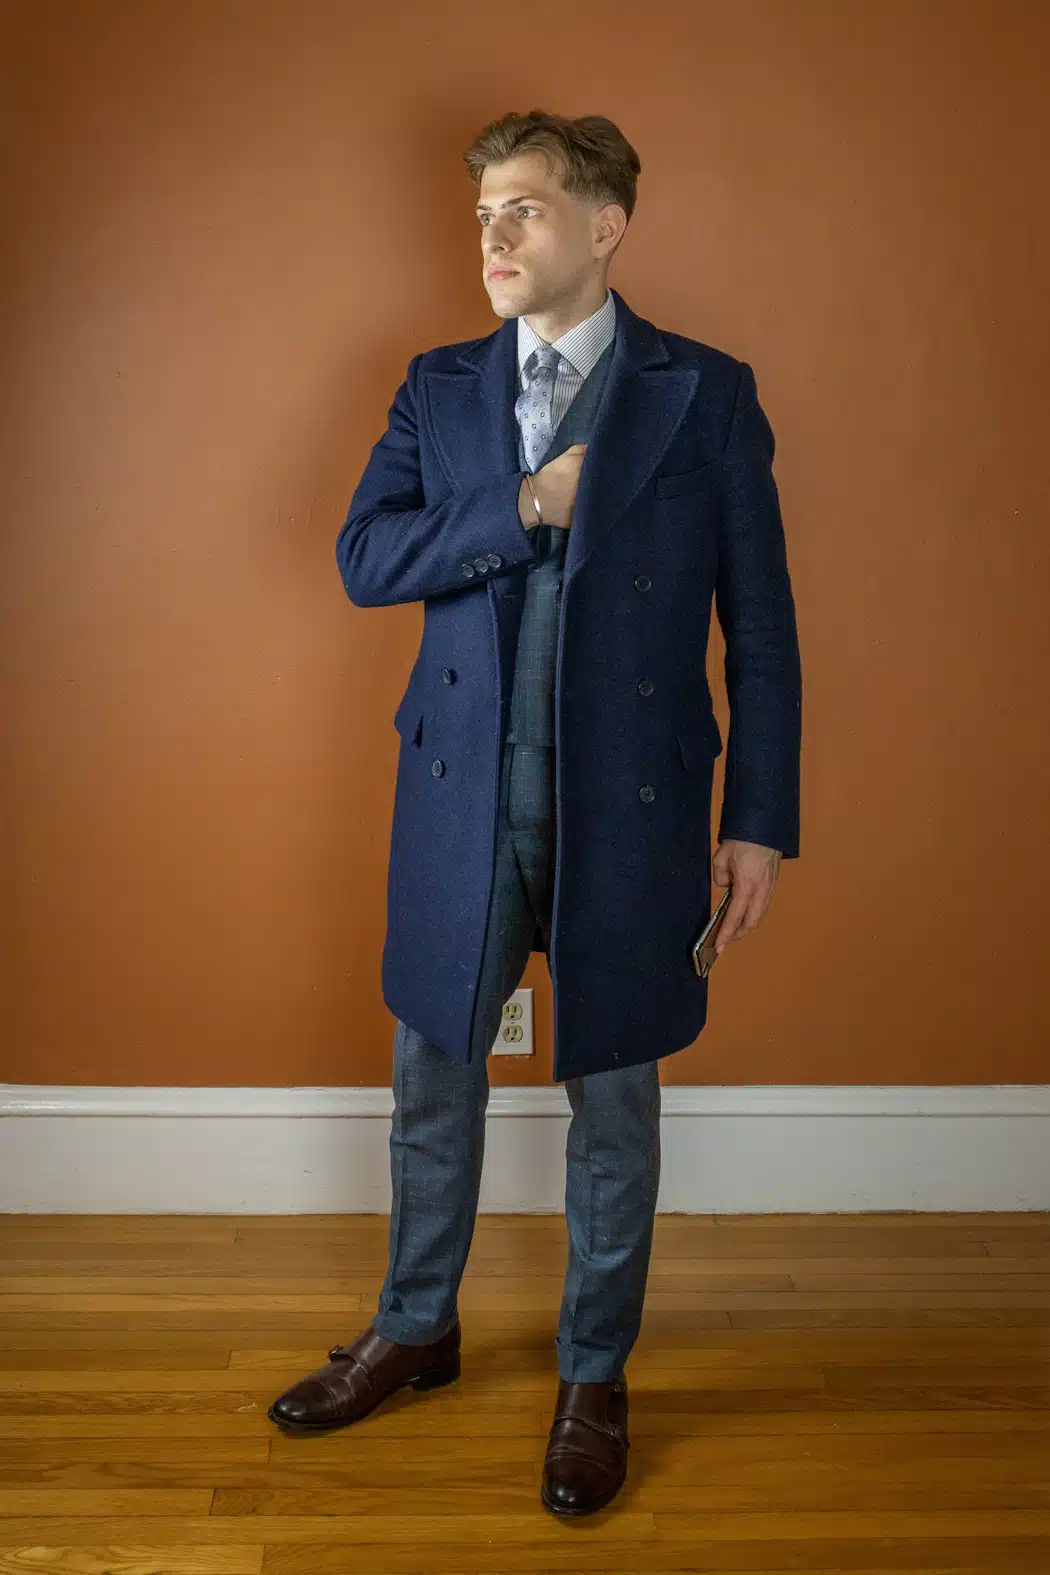 Ryan wearing Thursday boots Saints with a suit and overcoat